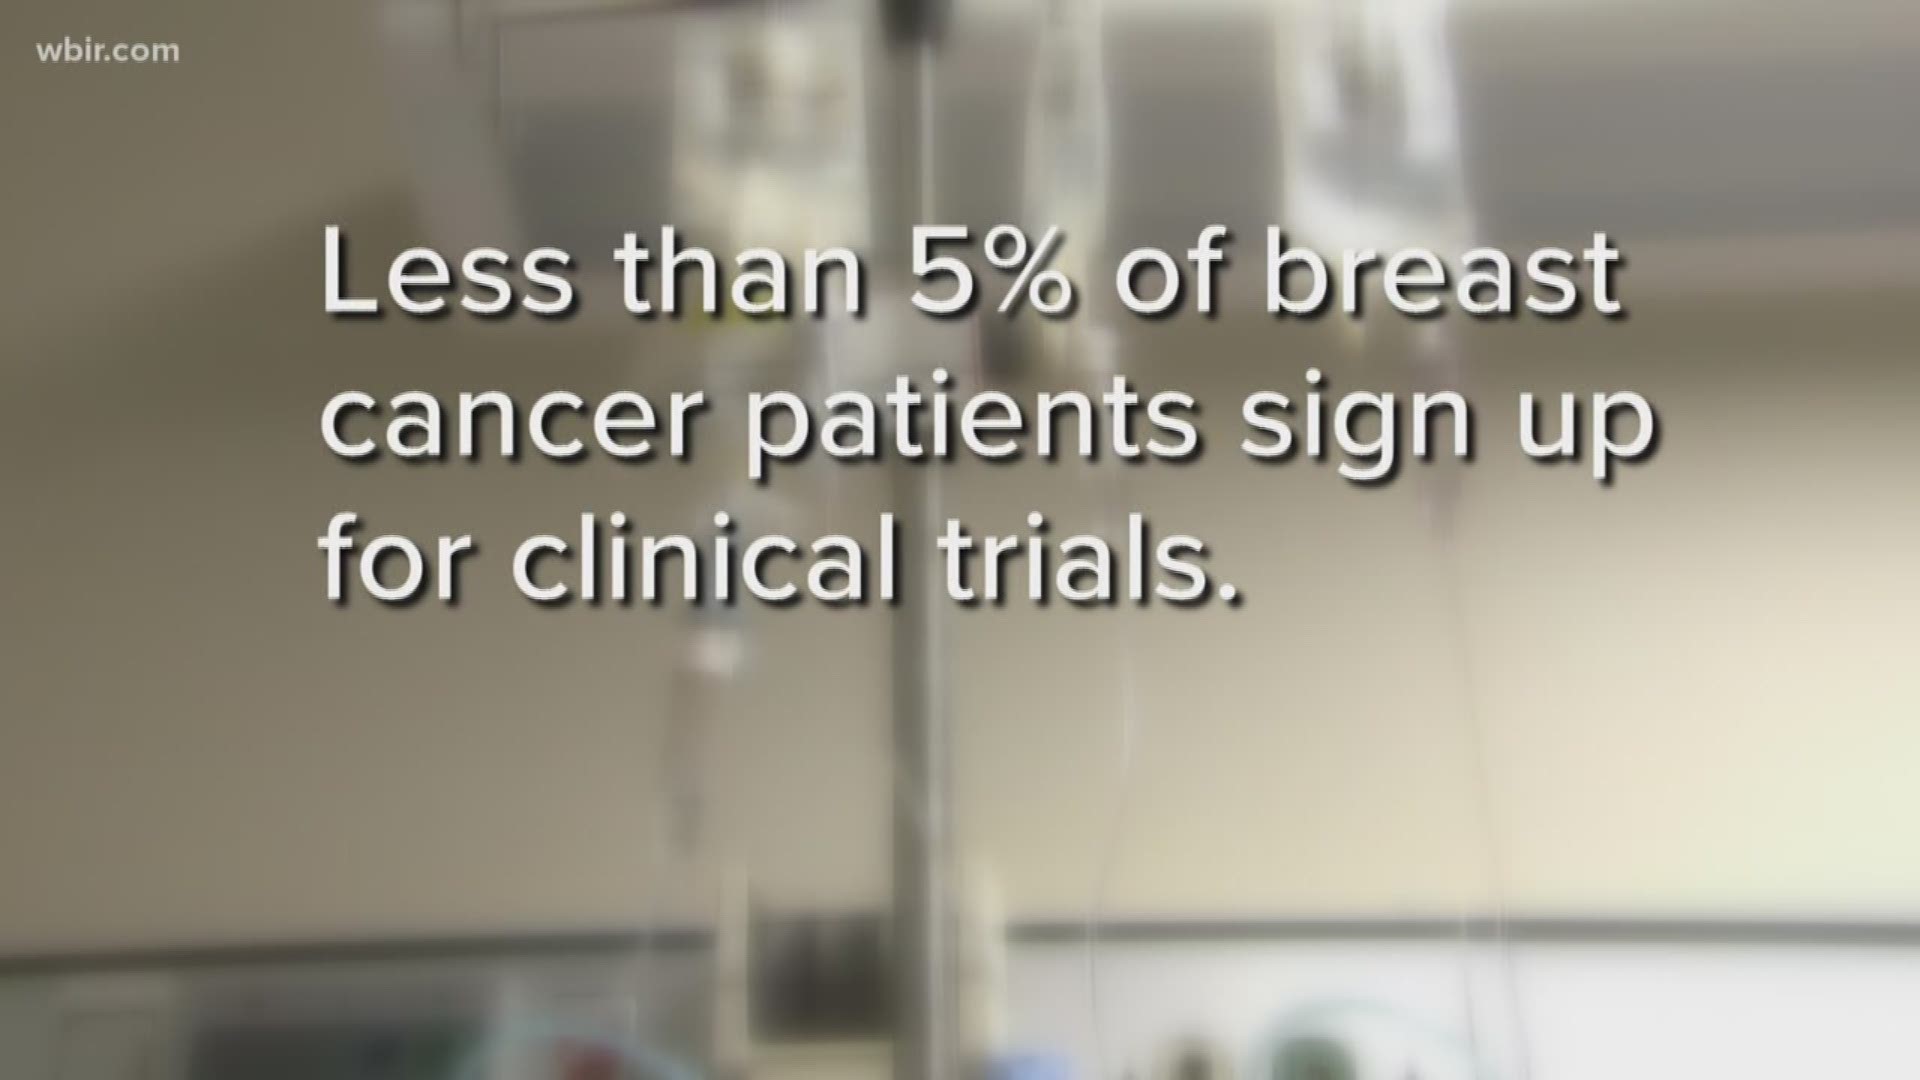 There are a number of clinical trials that test different treatments for breast cancer and other diseases, but very few people sign up for them.